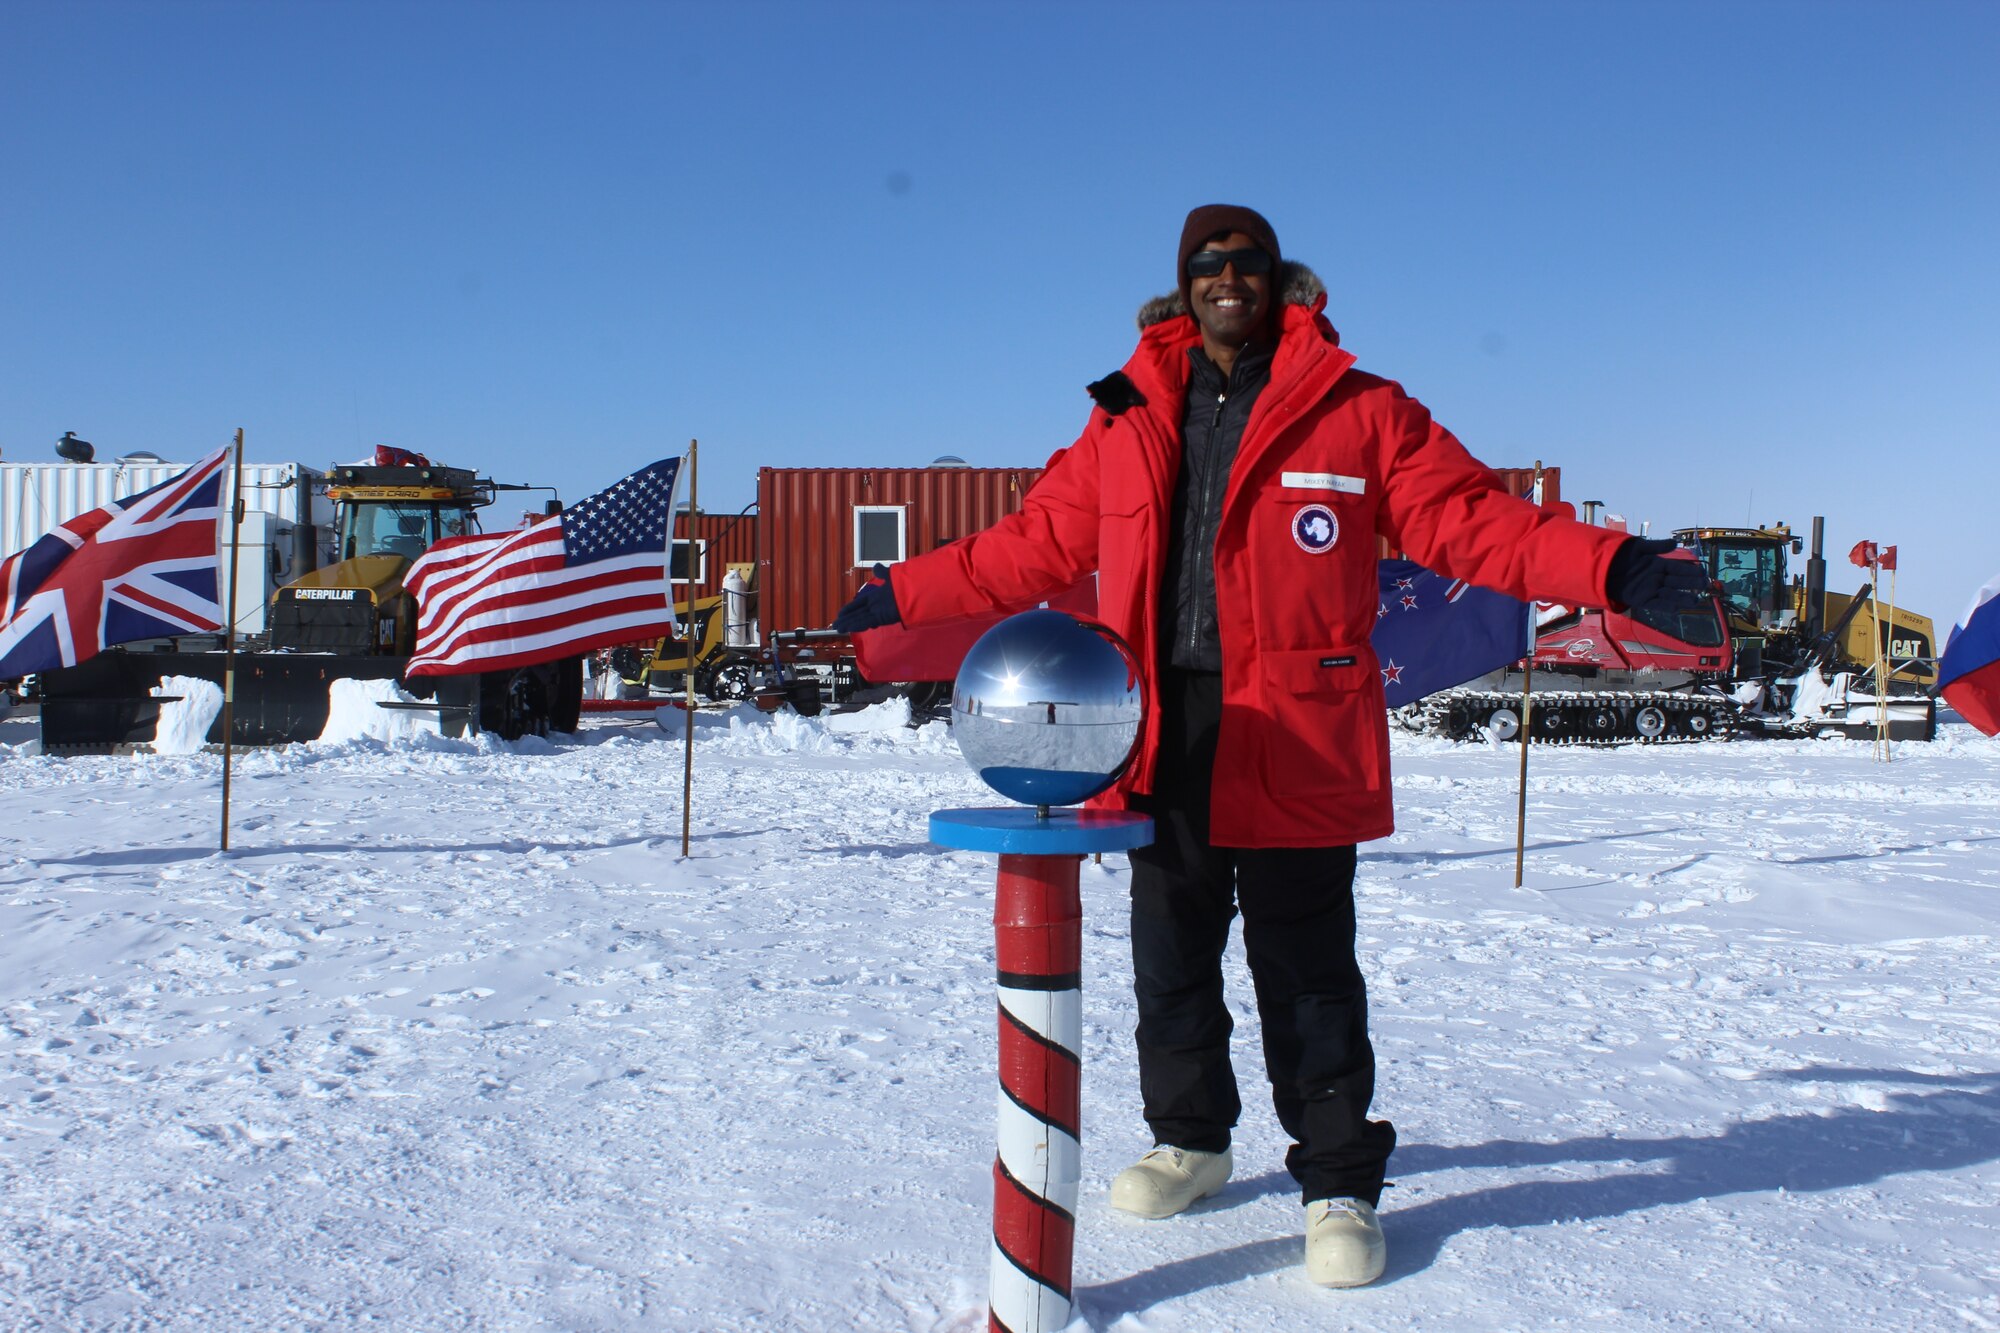 Capt. Michael Nayak, an AFRL scientist, at the Ceremonial South Pole with the South Pole Traverse (SPT) in the background. Several groups of trucks, bulldozers and Sno-Cats (tracked vehicles for snowy conditions) pull massive sleds with supplies from McMurdo Station to the South Pole Station. Each sled holds 20,000 gallons, or 140,000 pounds, of jet fuel. Every year, workers rebuild the thousand mile-road that supports this journey. (Courtesy photo)